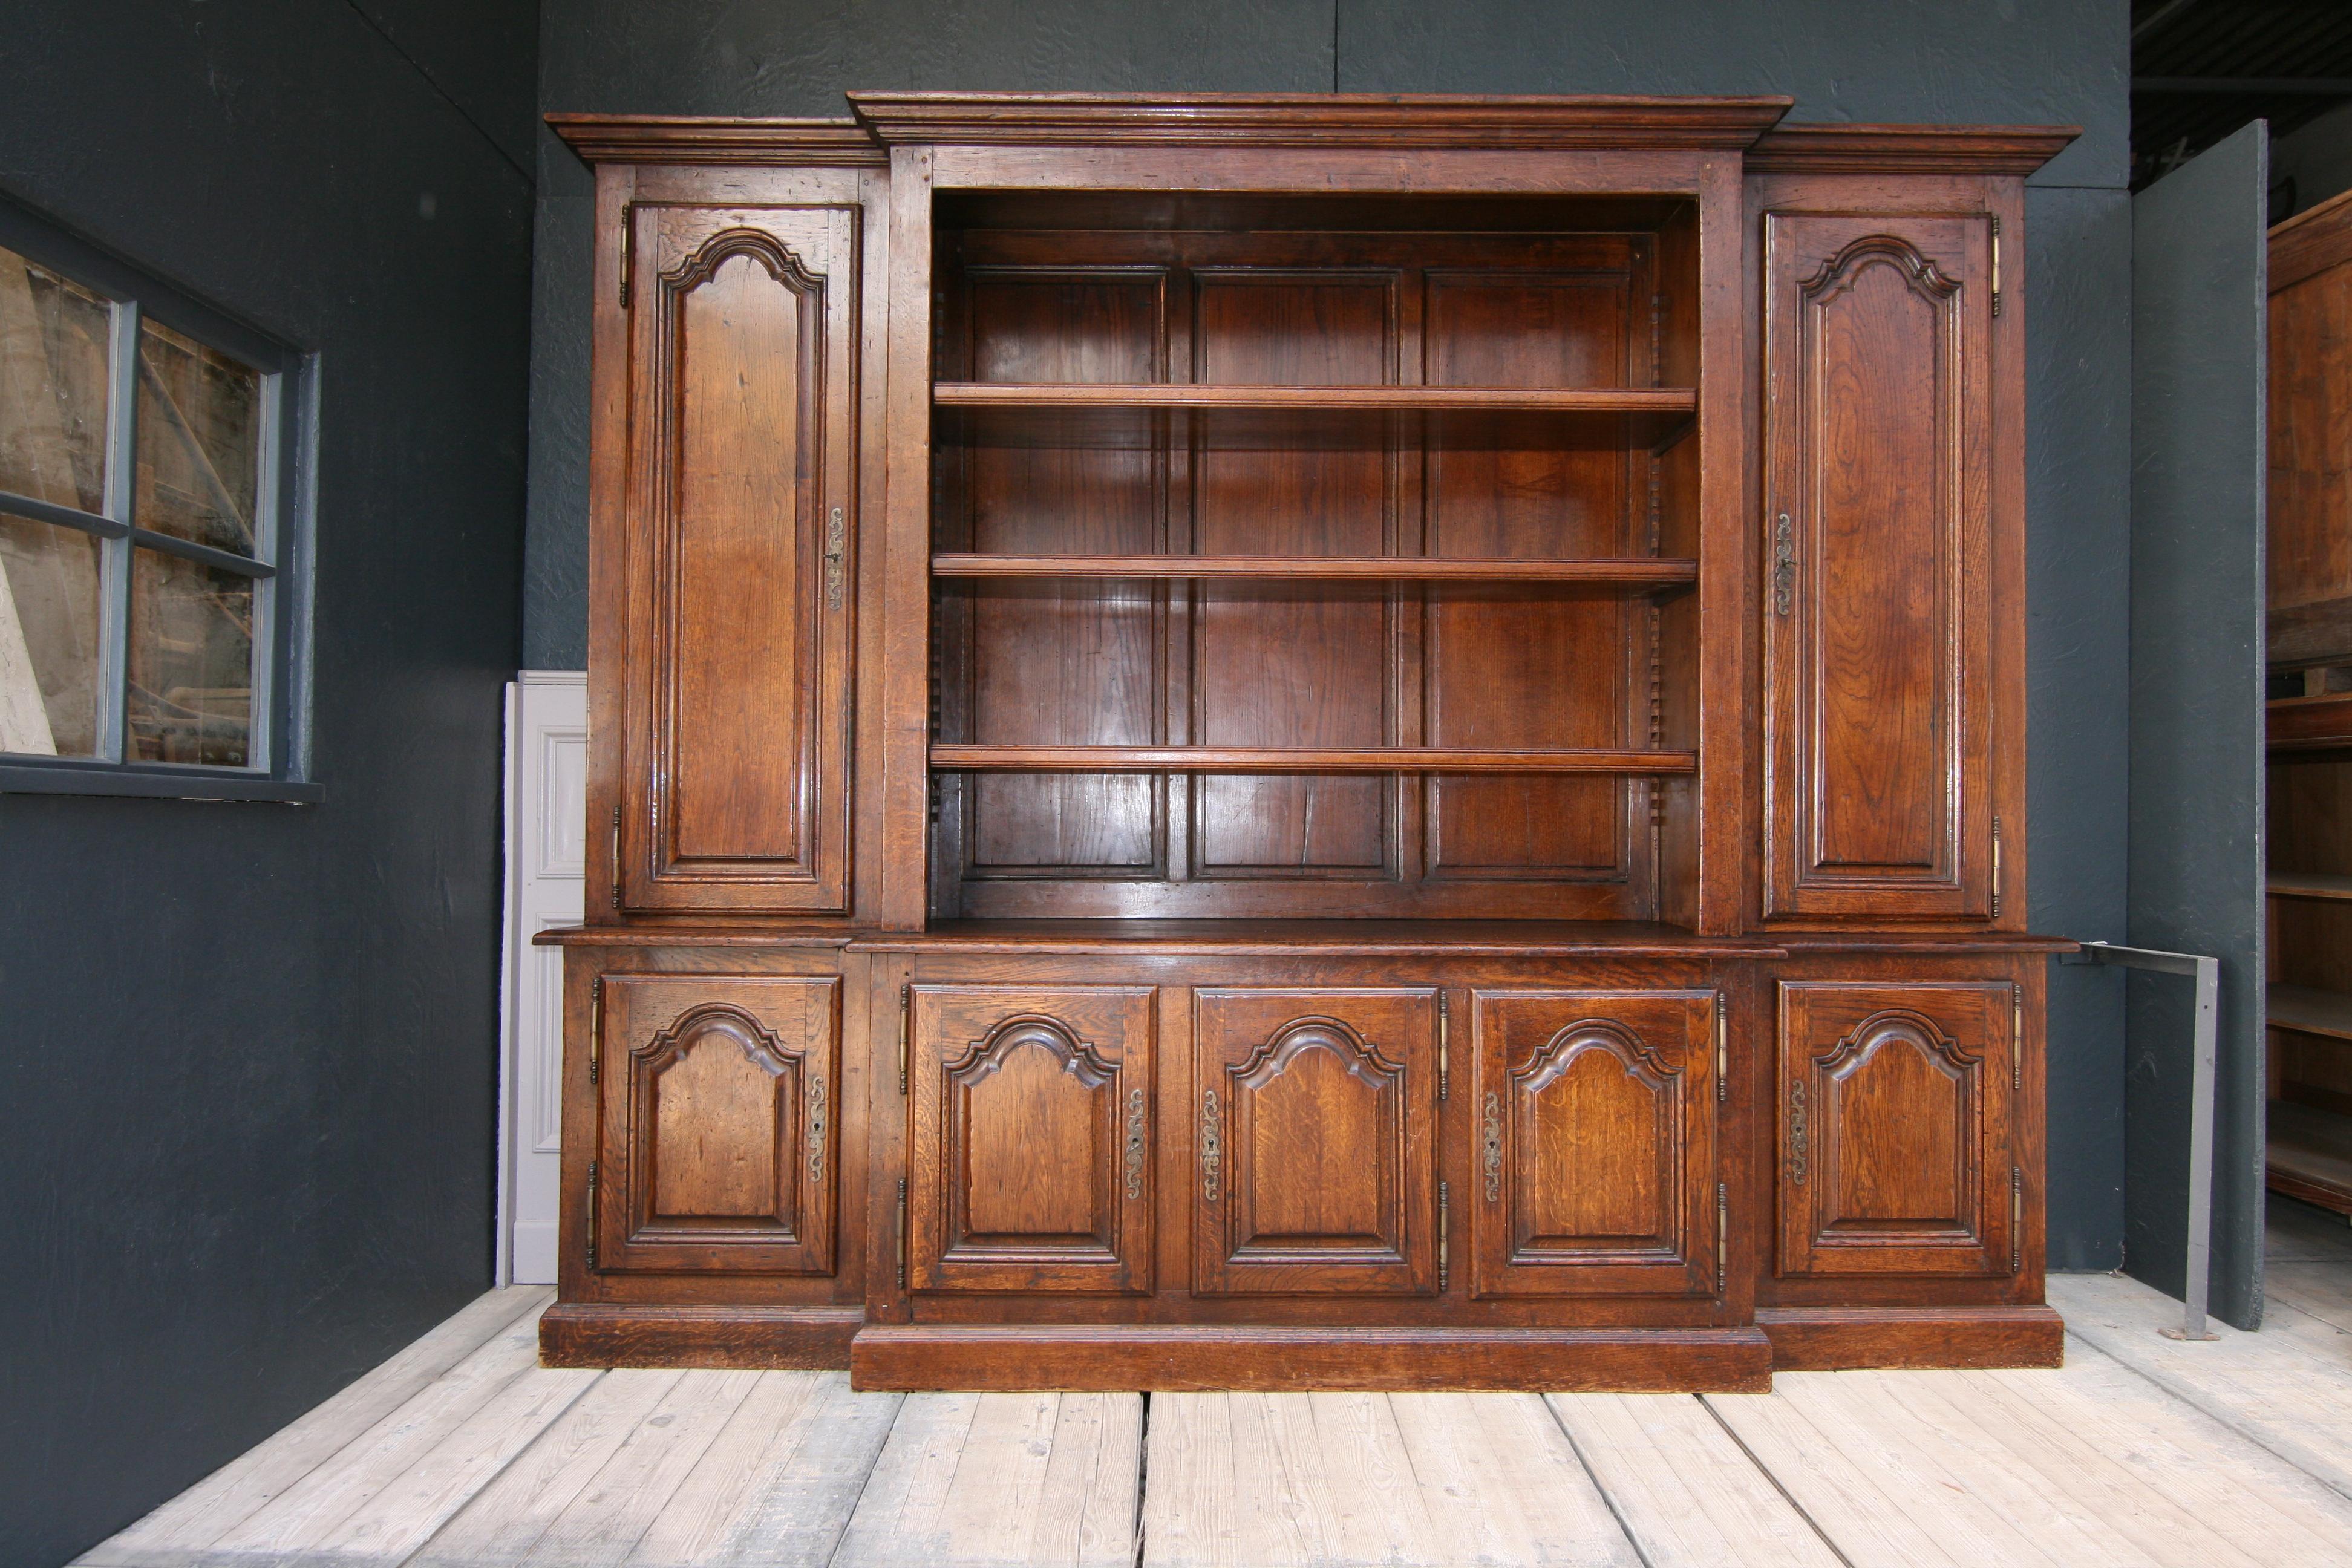 Large, high-quality French bookcase or cupboard from the 20th century, made of solid oak.

Lower part with 5 doors, behind which there are shelves.

Upper part with 2 large doors, each with 3 adjustable shelves, and a large open part in the